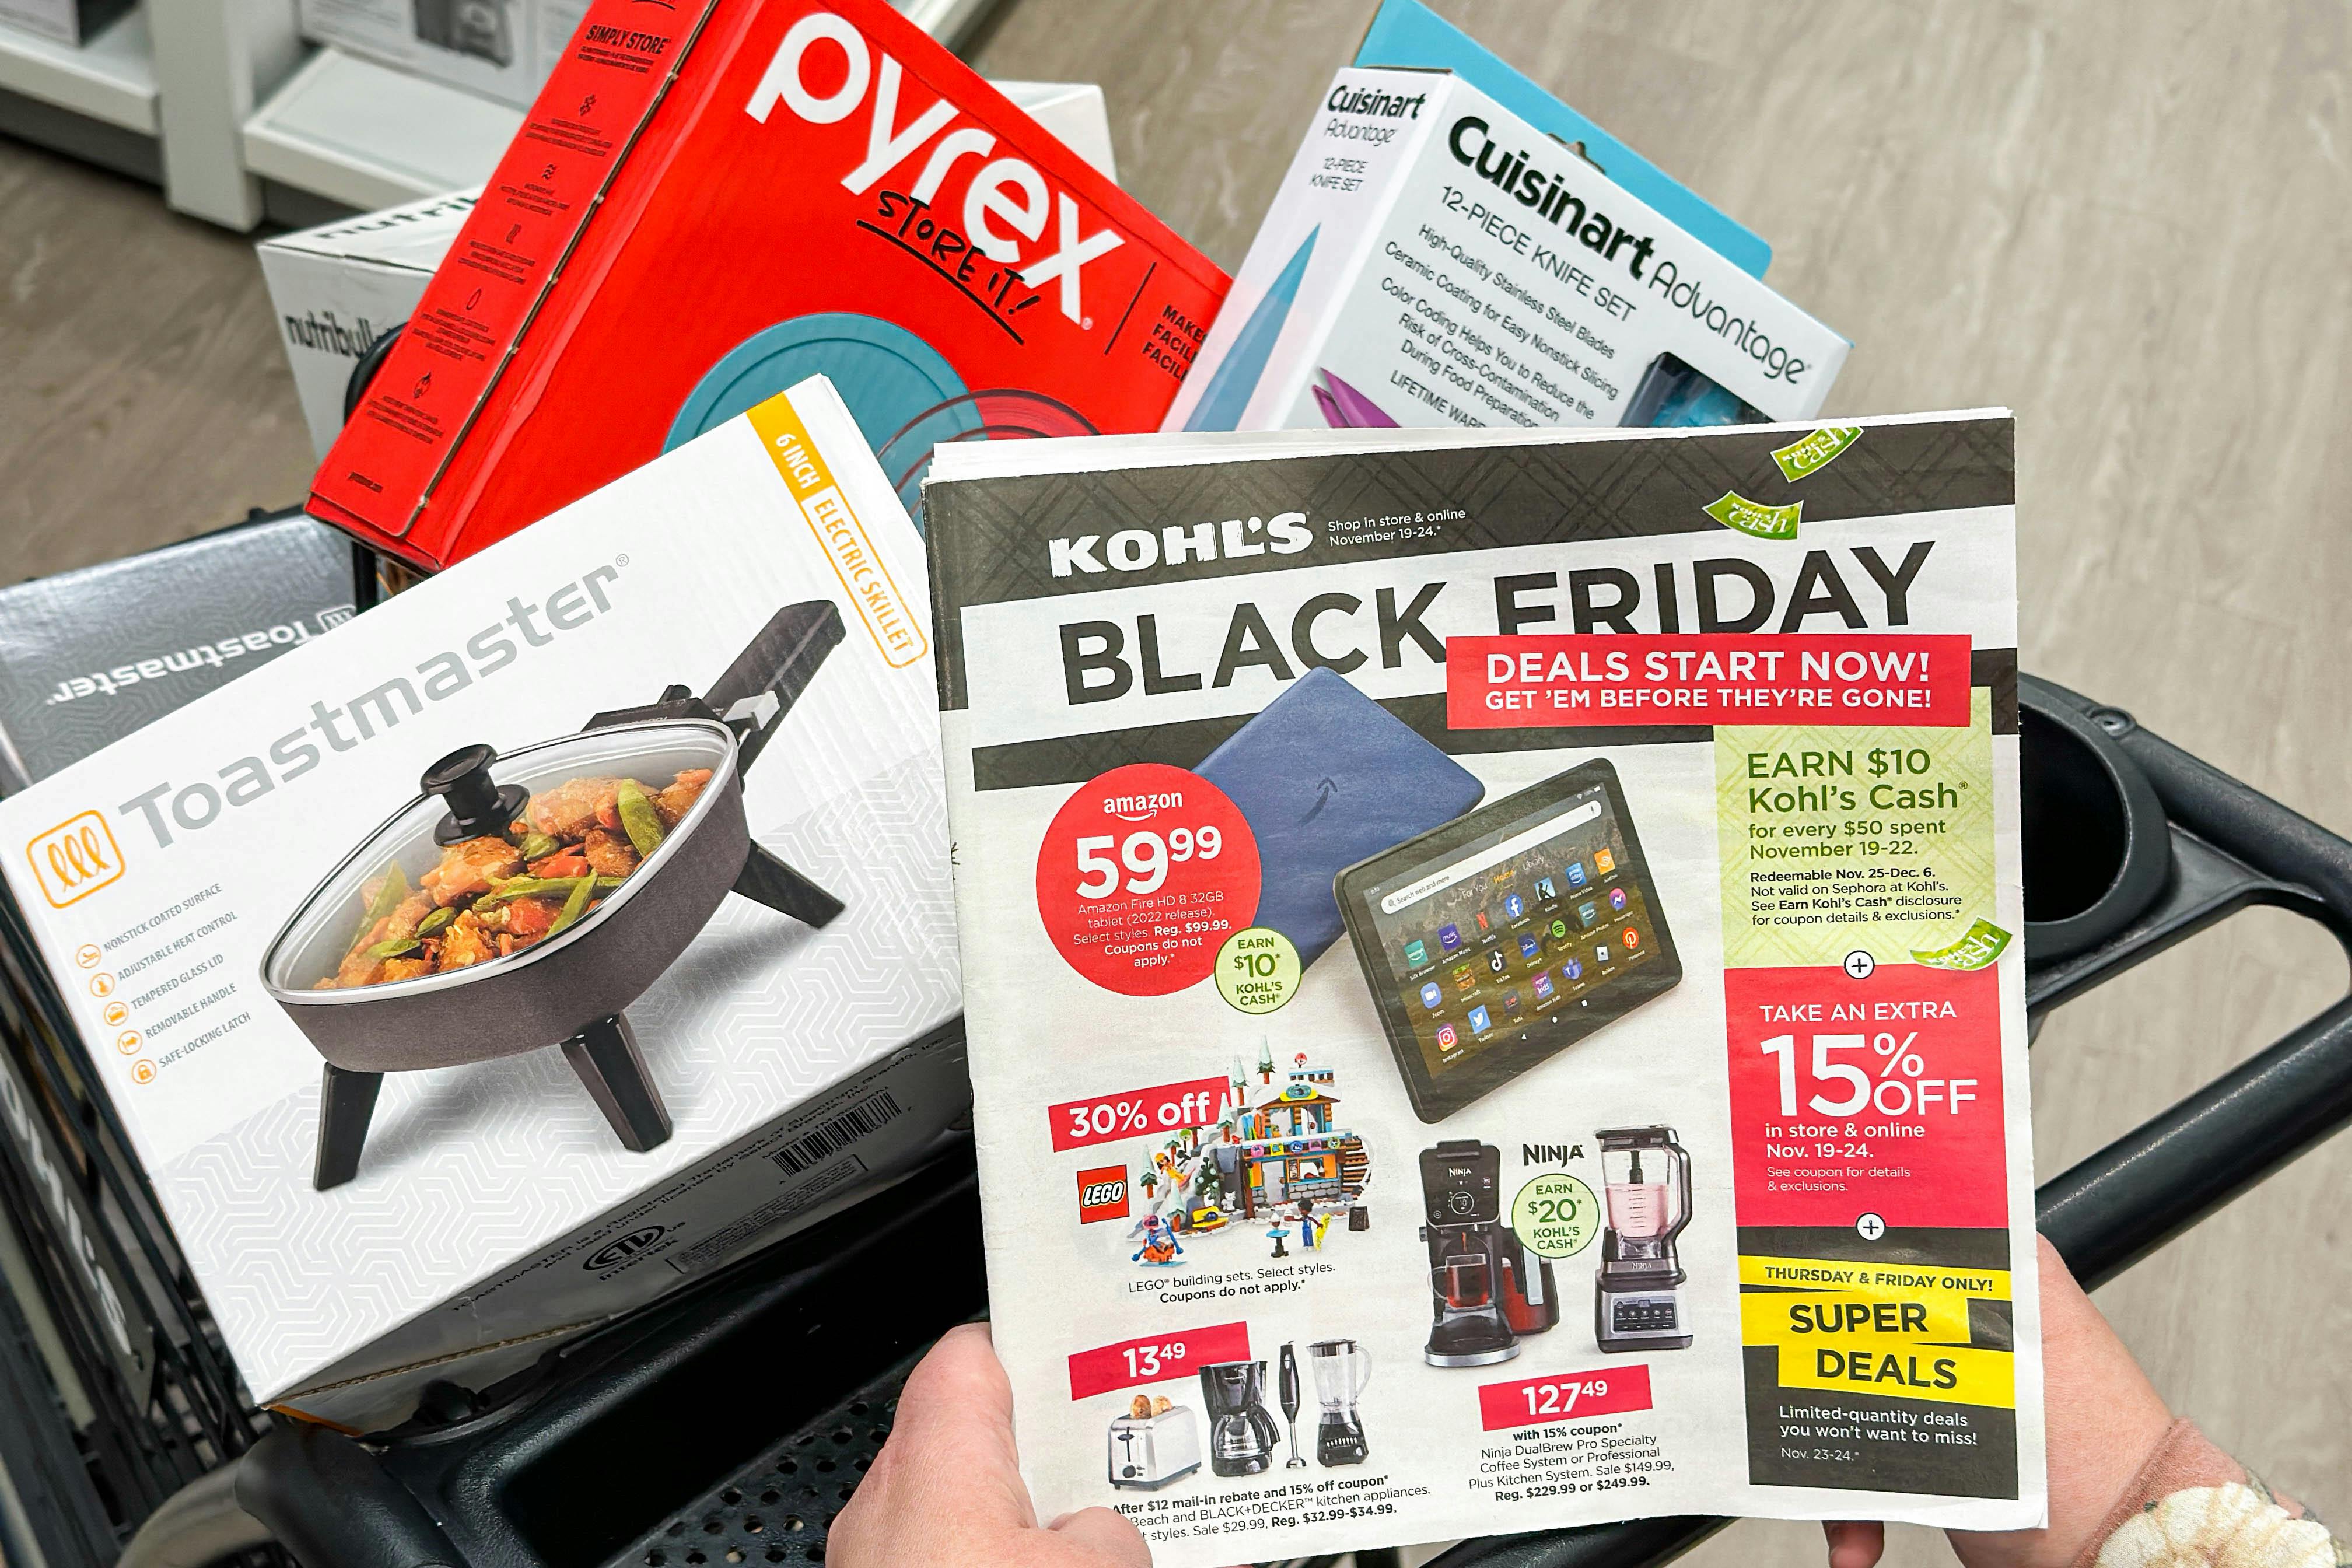 Kohl's Black Friday: How to Shop It to Save More Than 80% - The